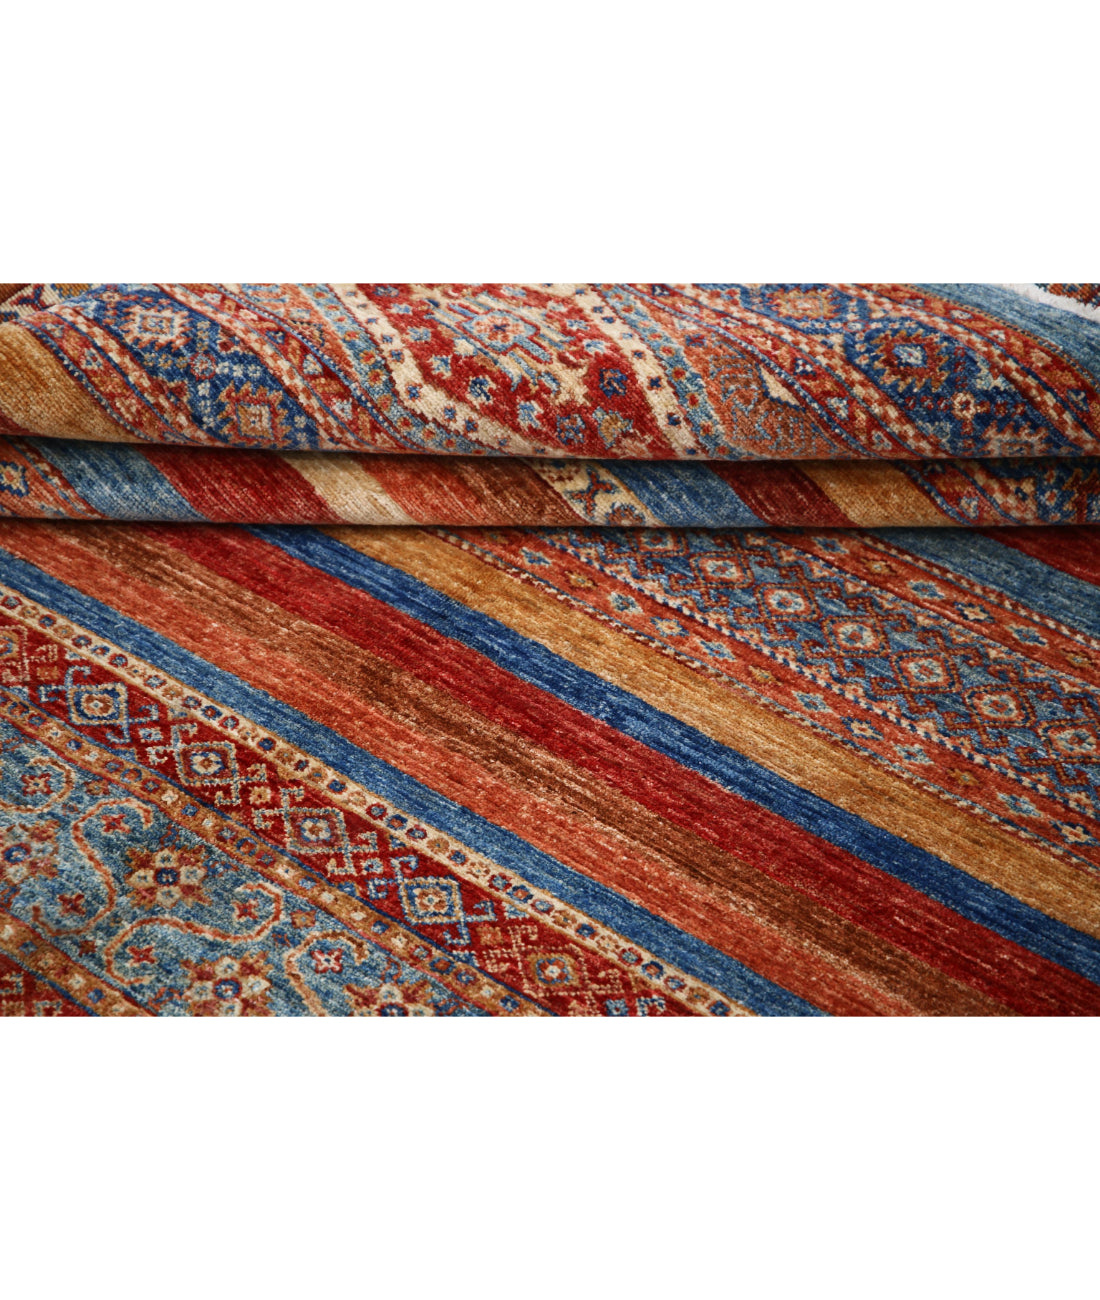 Hand Knotted Khurjeen Wool Rug - 6'7'' x 10'0'' 6'7'' x 10'0'' (198 X 300) / Multi / Multi